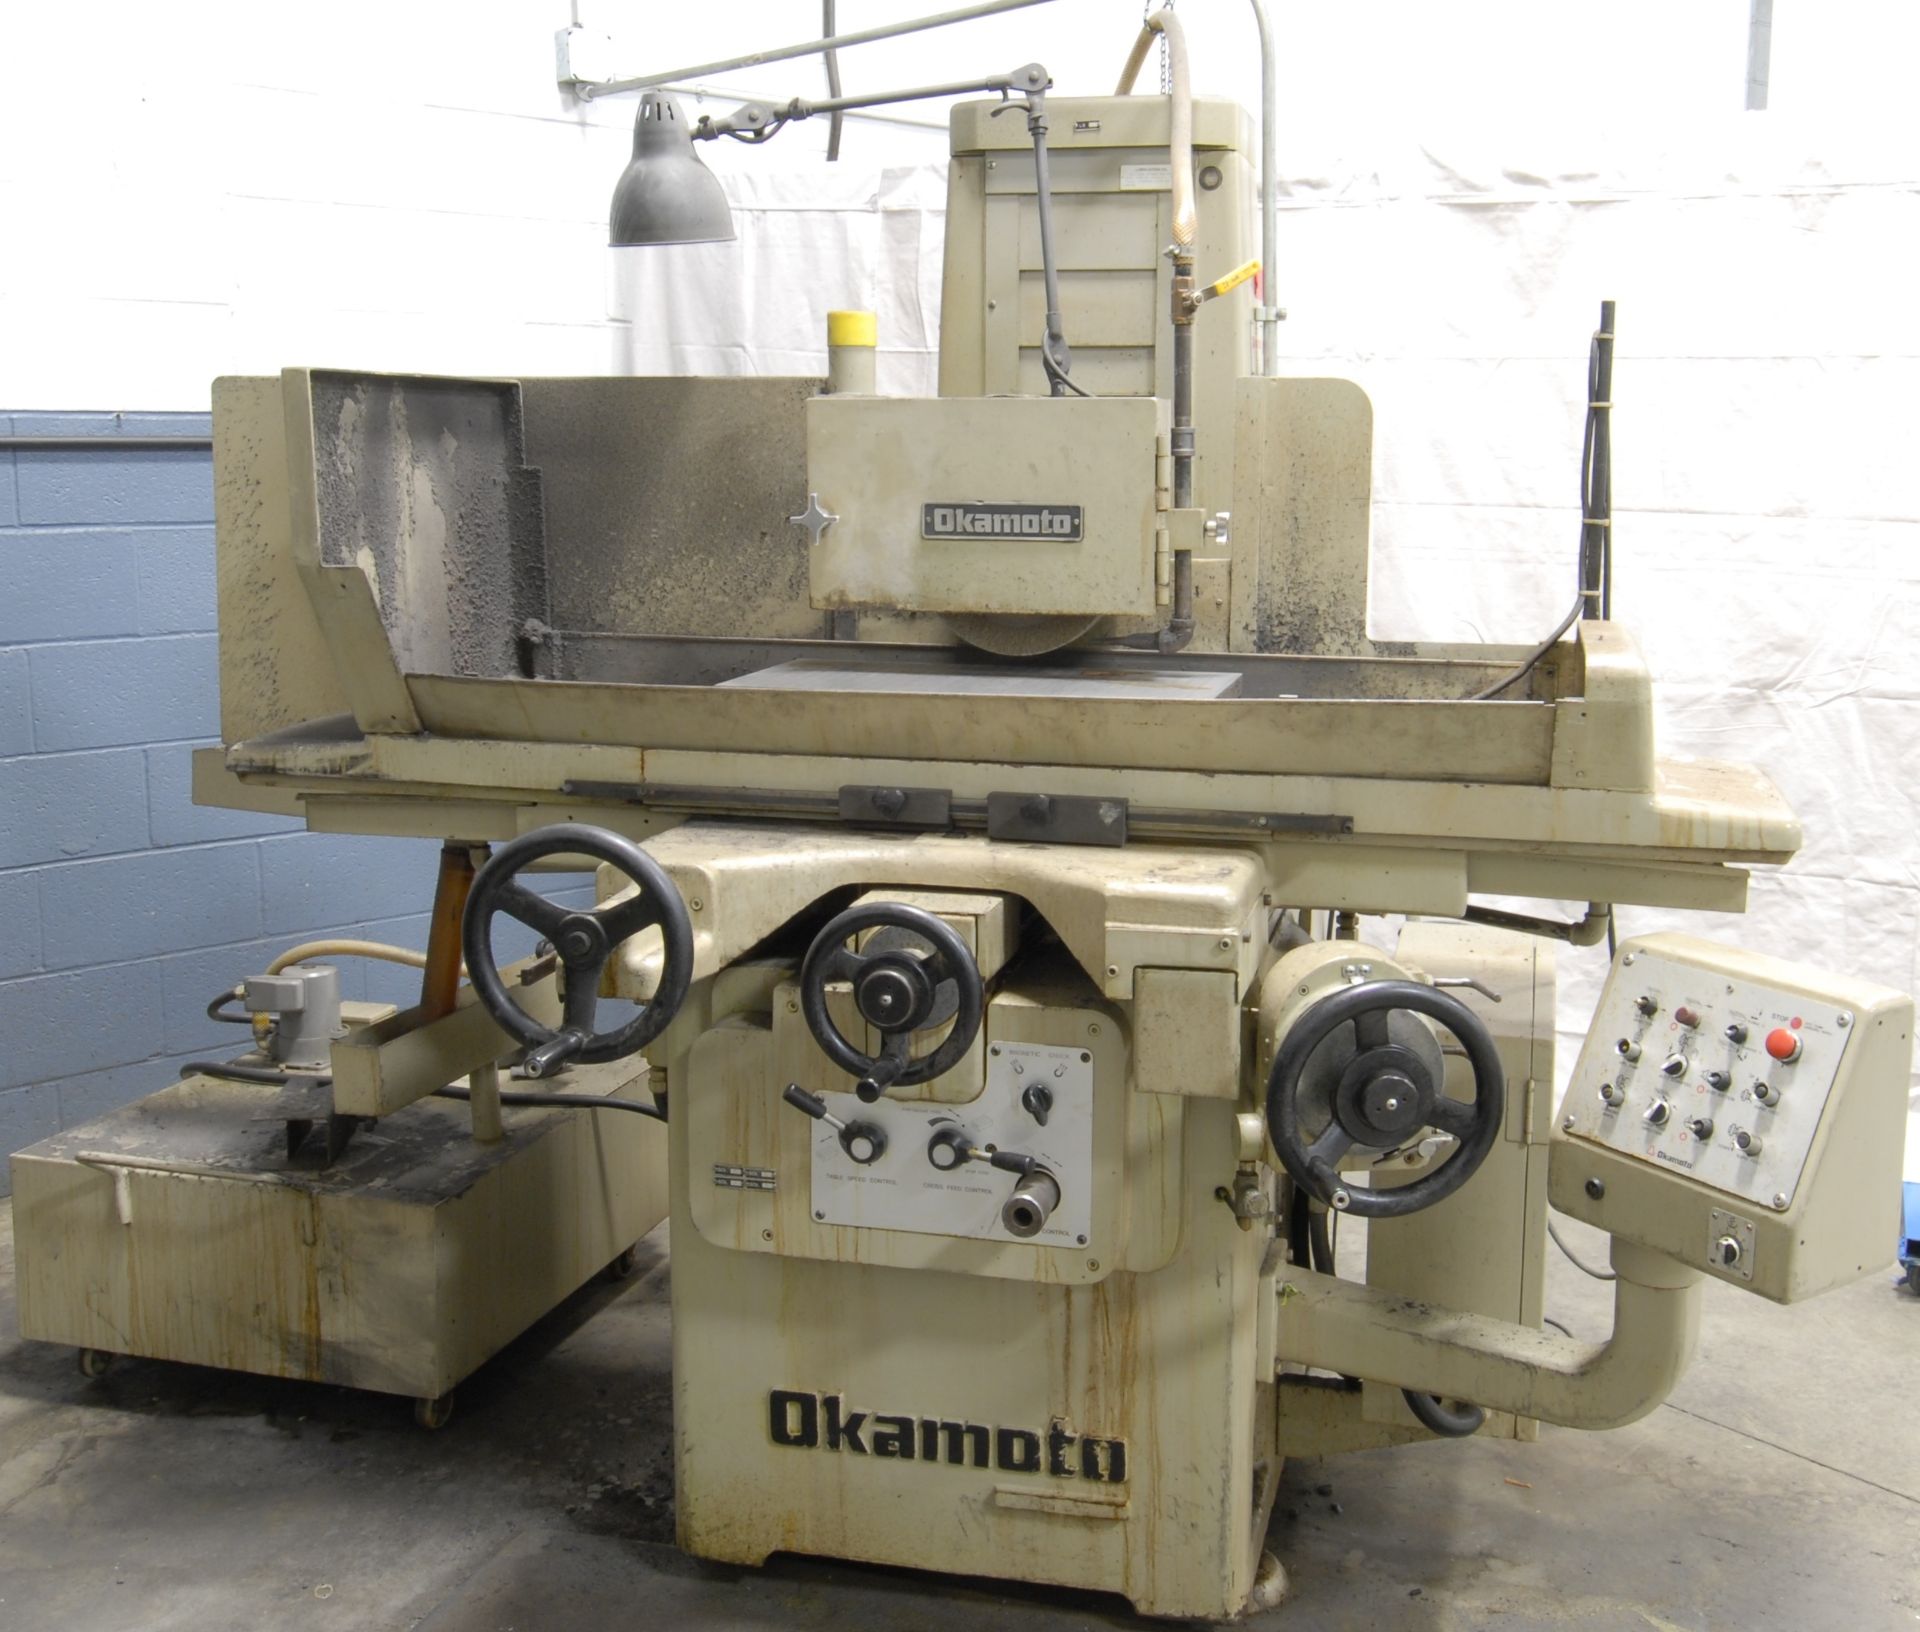 OKAMOTO ACL124N HYDRAULIC SURFACE GRINDER WITH 24" X 12" MAGNETIC BASE PLATE, 10" GRINDING WHEEL,